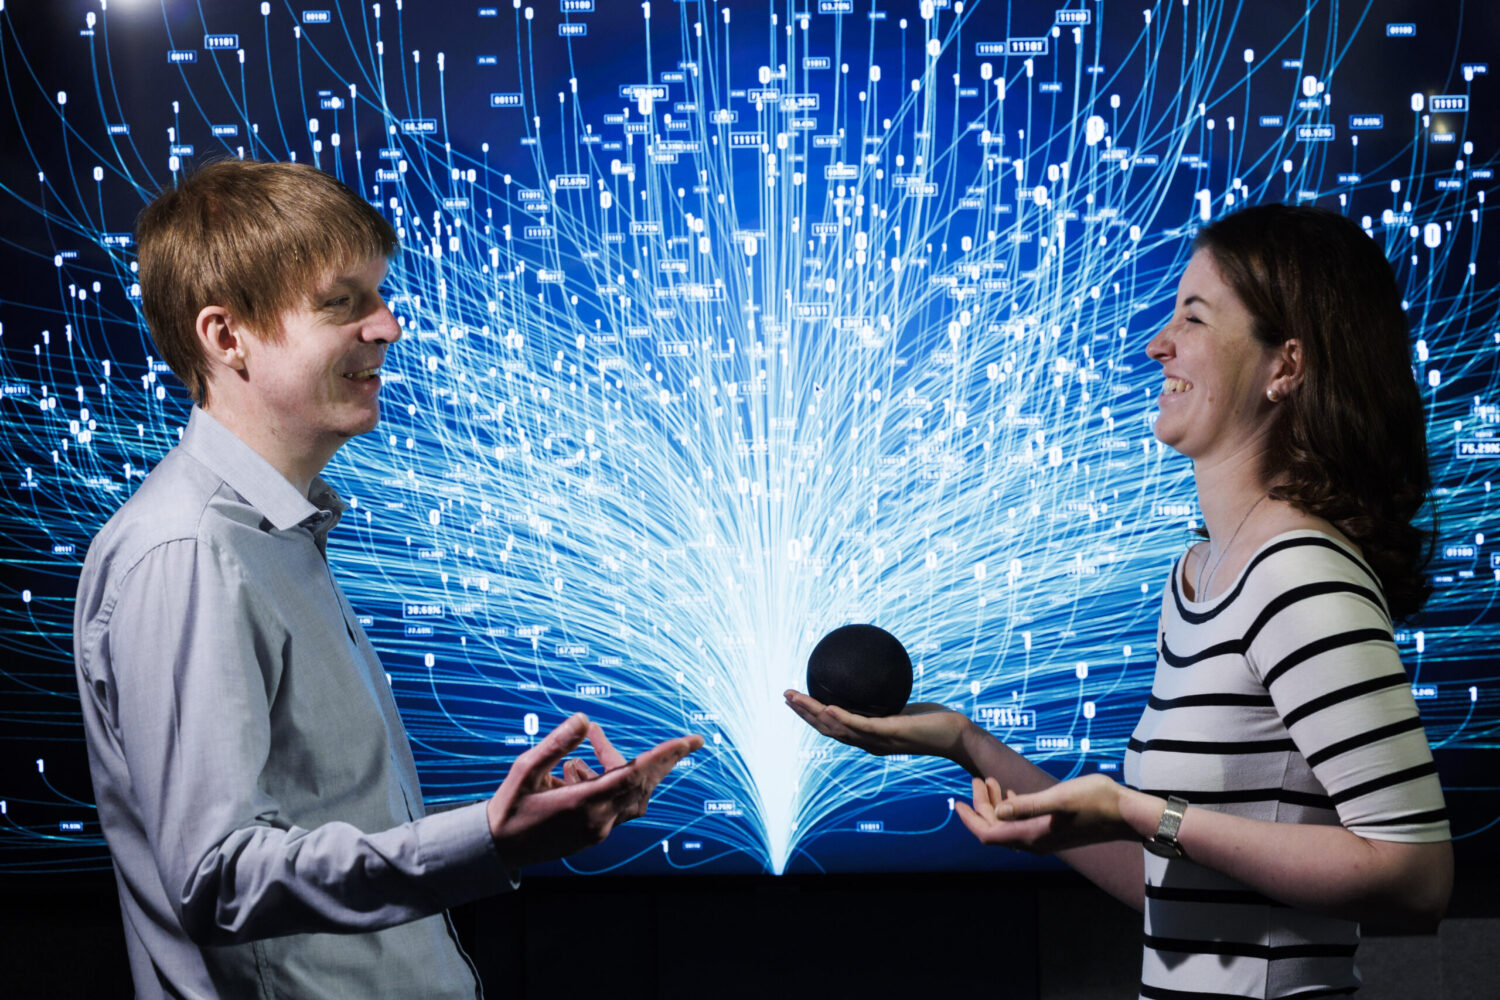 Vision Ireland service users ex Rose of Tralee Aine Sullivan and comedian Robbie Ford standing face to face and laughing in front of a black and glowing blue background at the launch of myVision Ireland Smart Hub